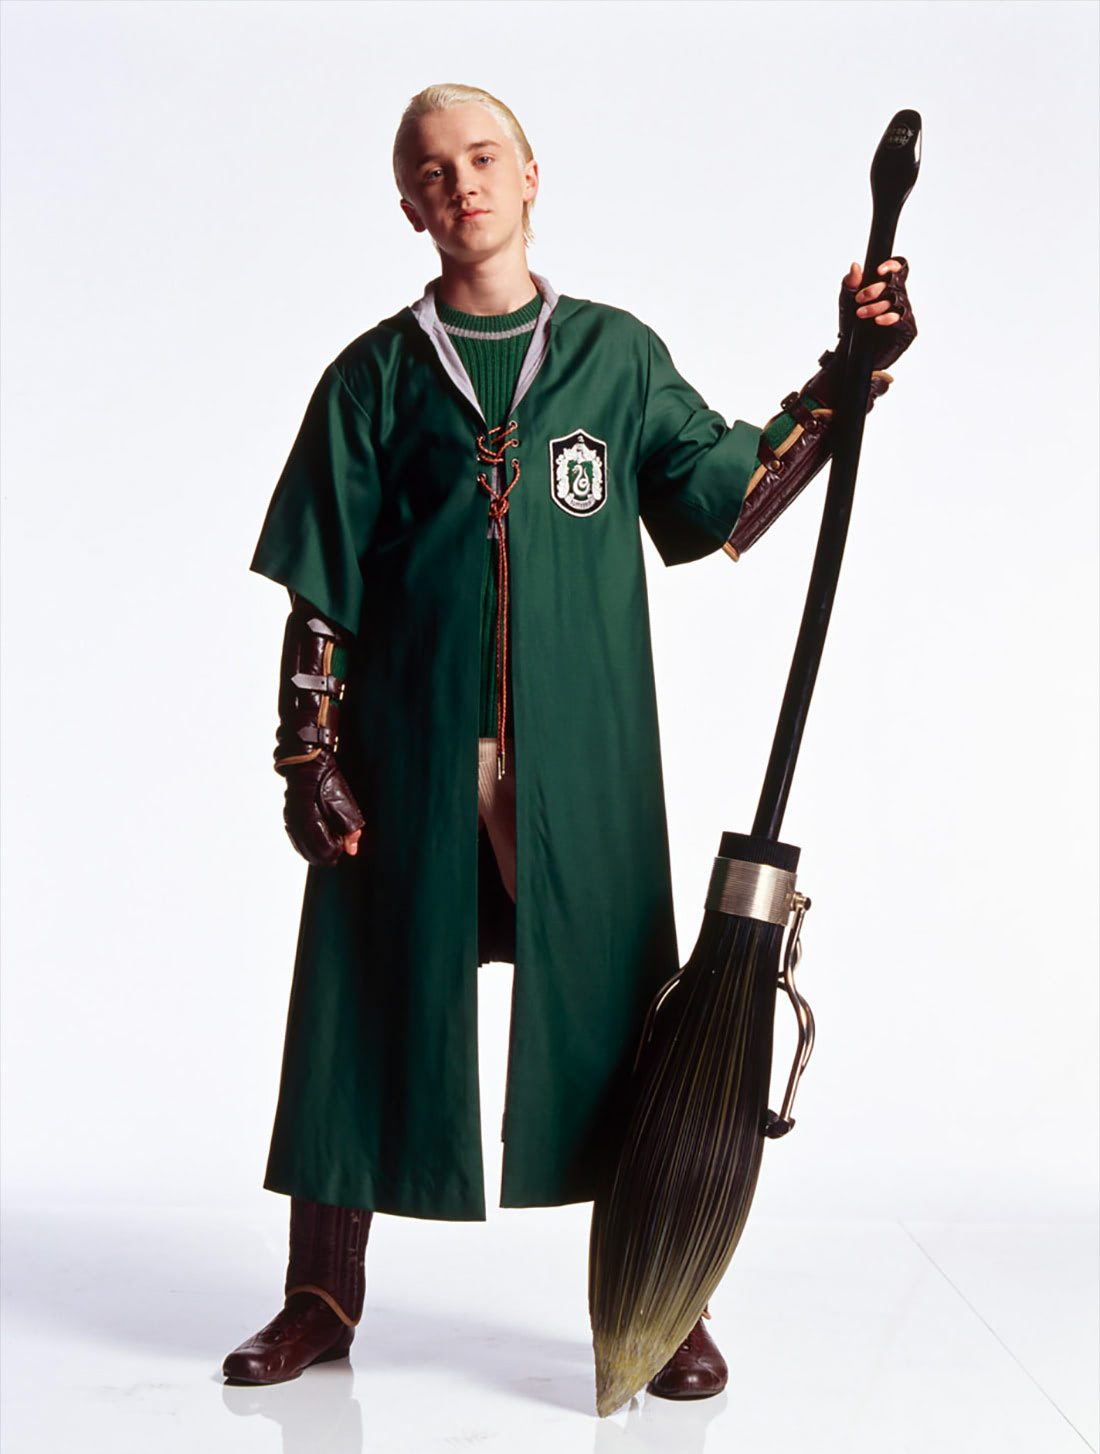 Portrait of Draco Malfoy in Quidditch robes